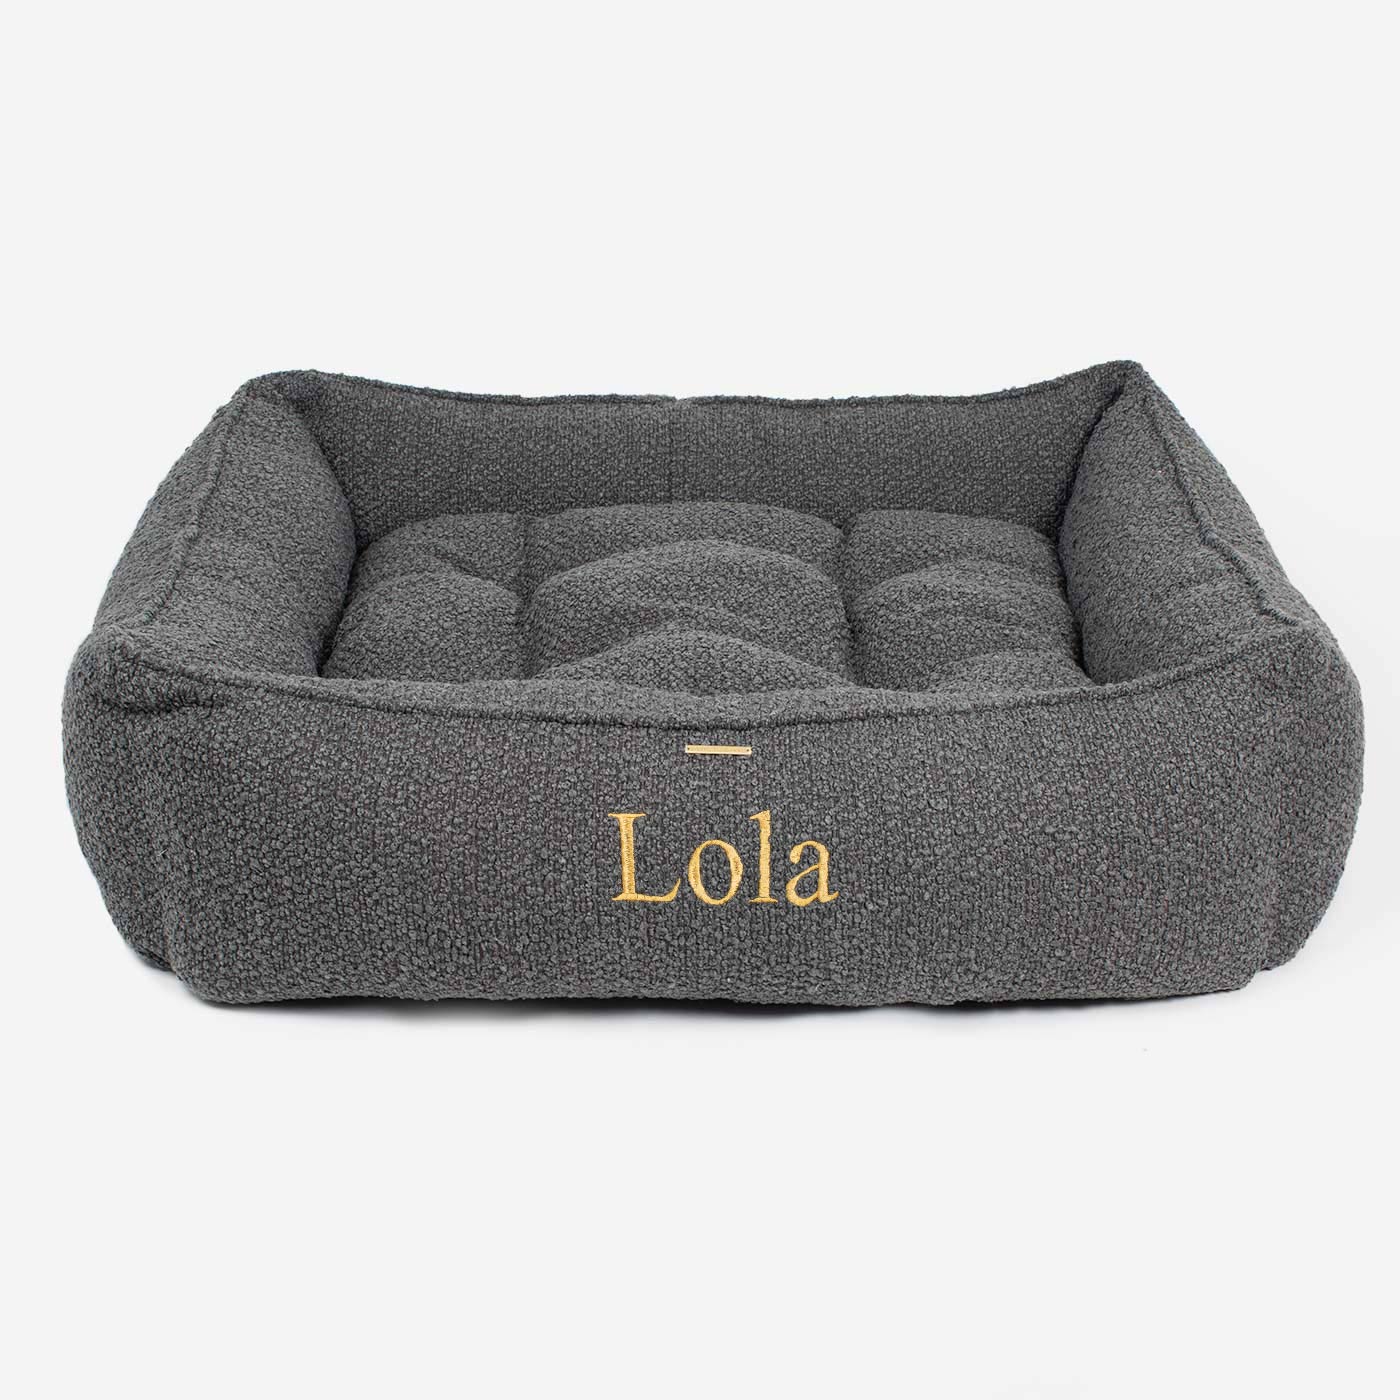 Discover This Luxurious Box Bed For Dogs, Made Using Beautiful Boucle Fabric To Craft The Perfect Dog Box Bed! In Stunning Granite Bouclé, Available To Personalise Now at Lords & Labradors    